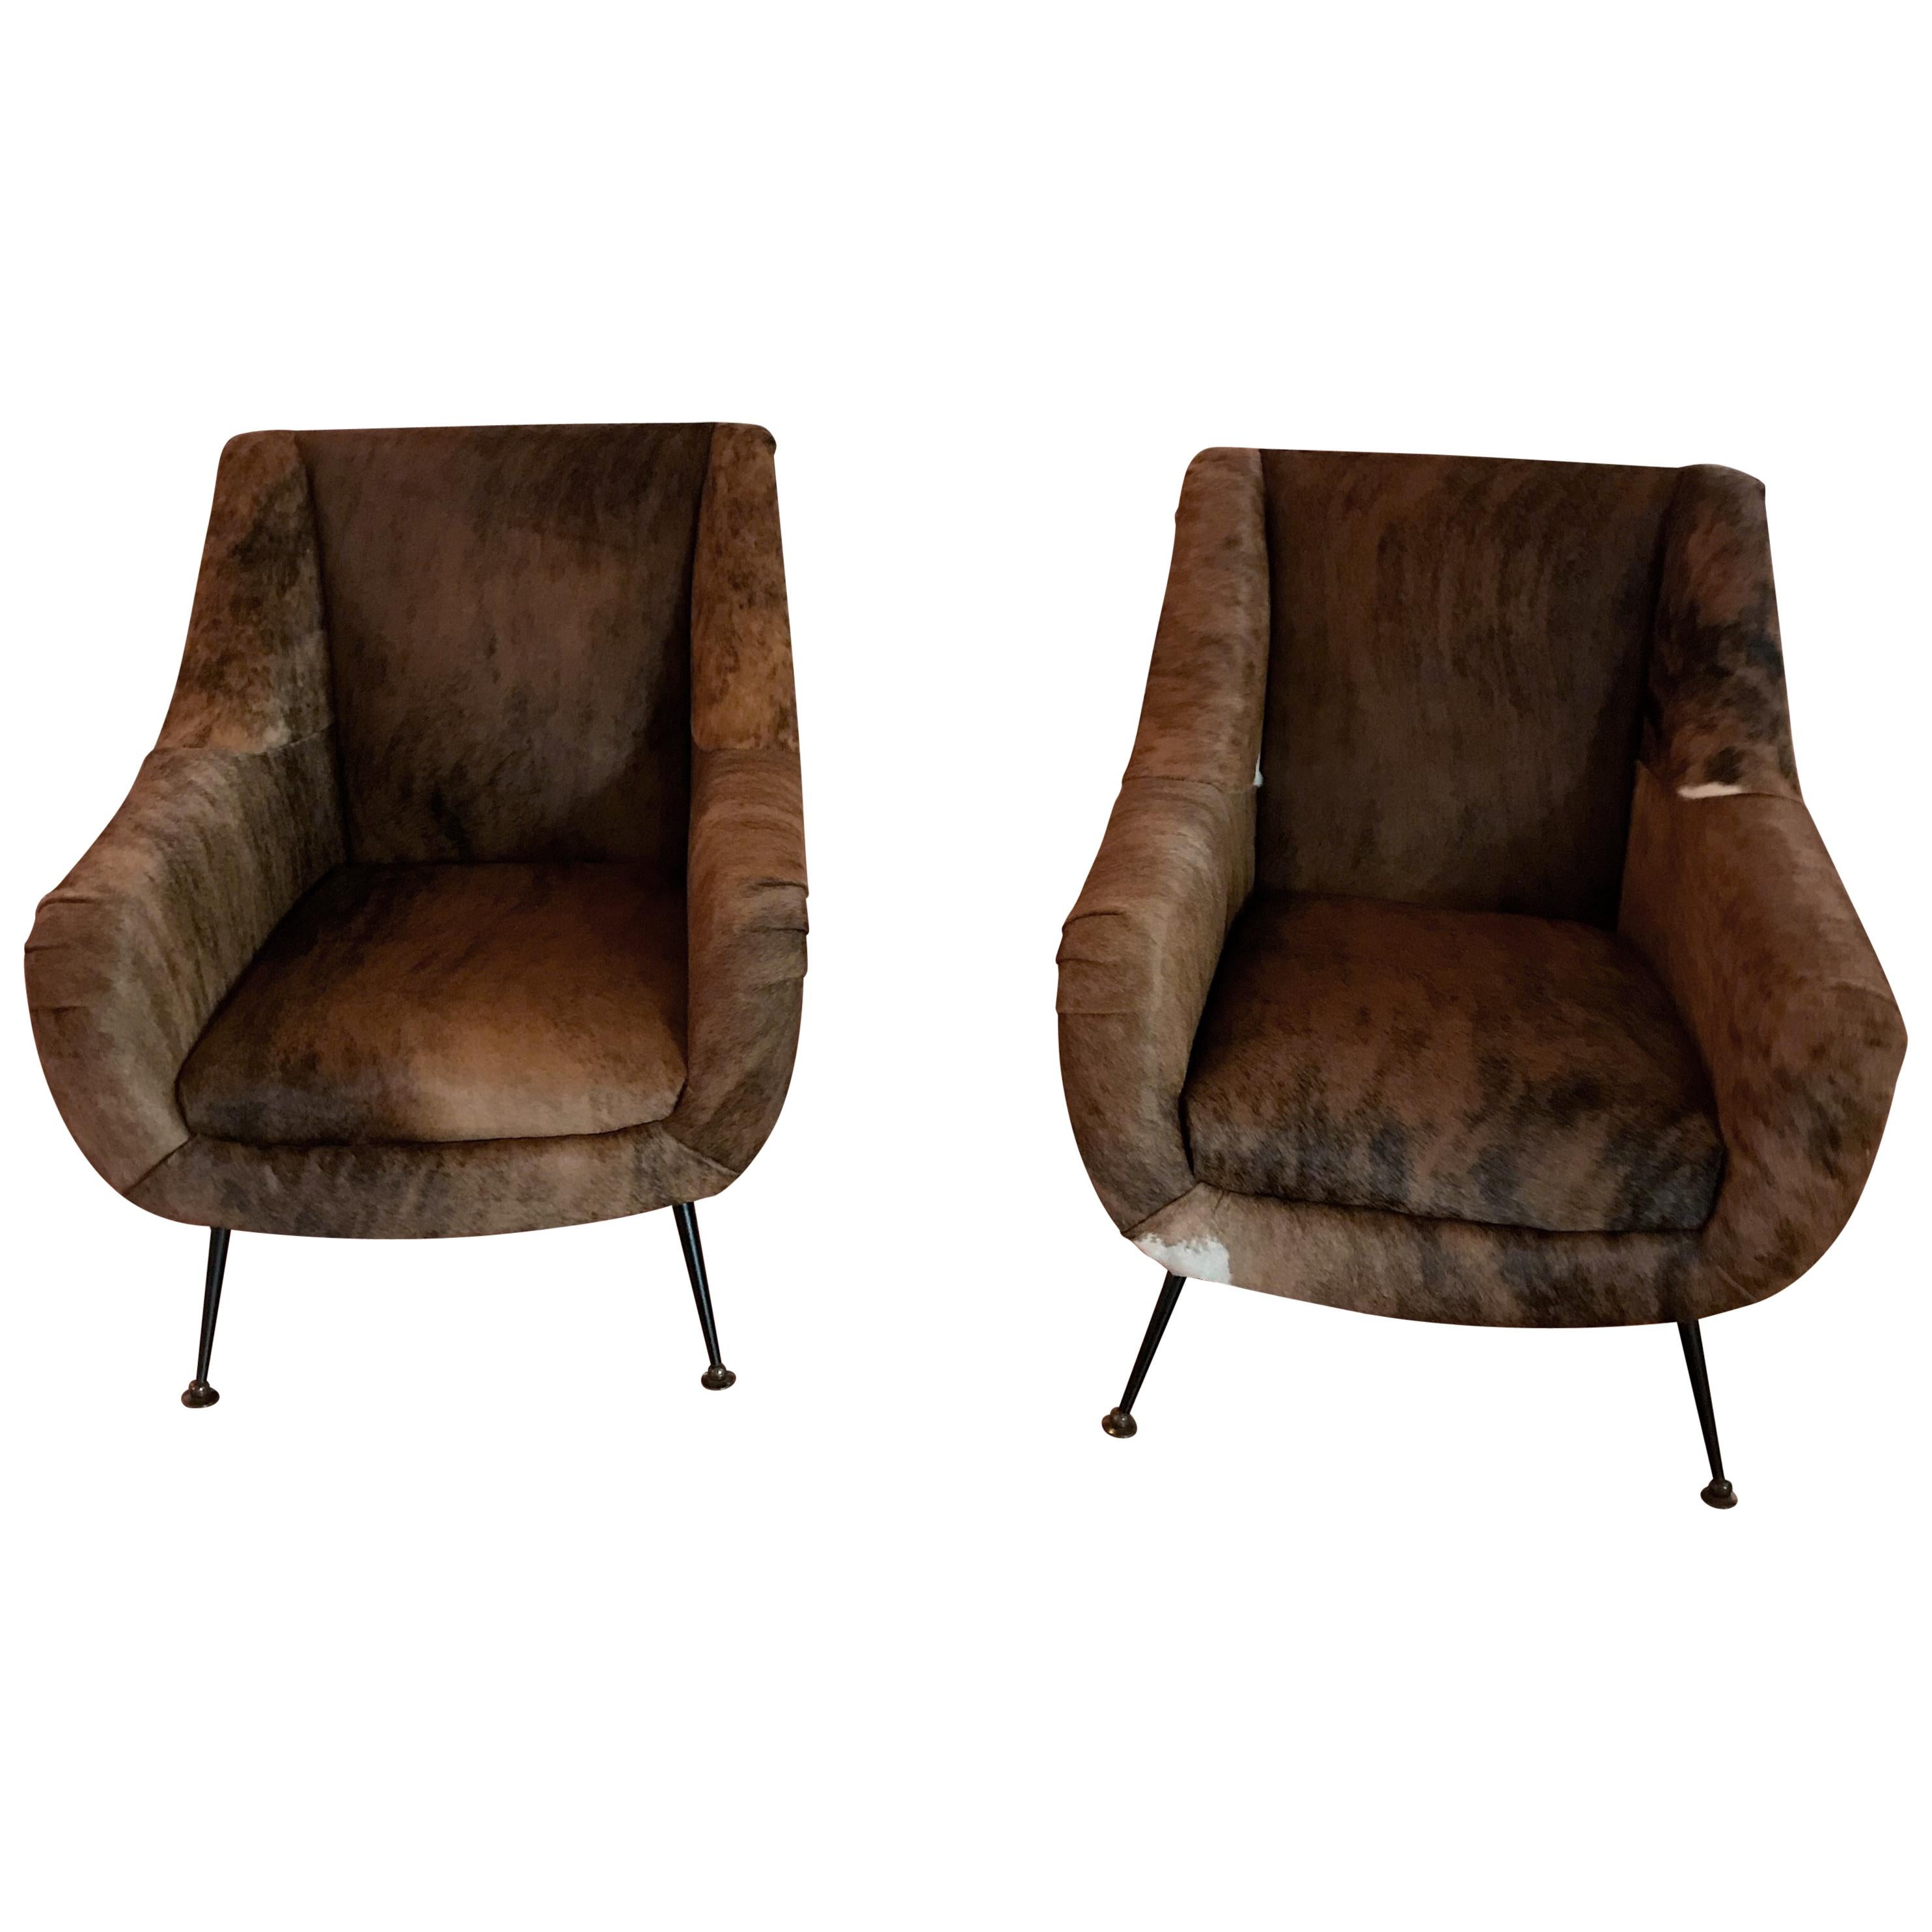 Pair of Italian Mid-Century Modern Club Chairs Covered in Cowhide For Sale